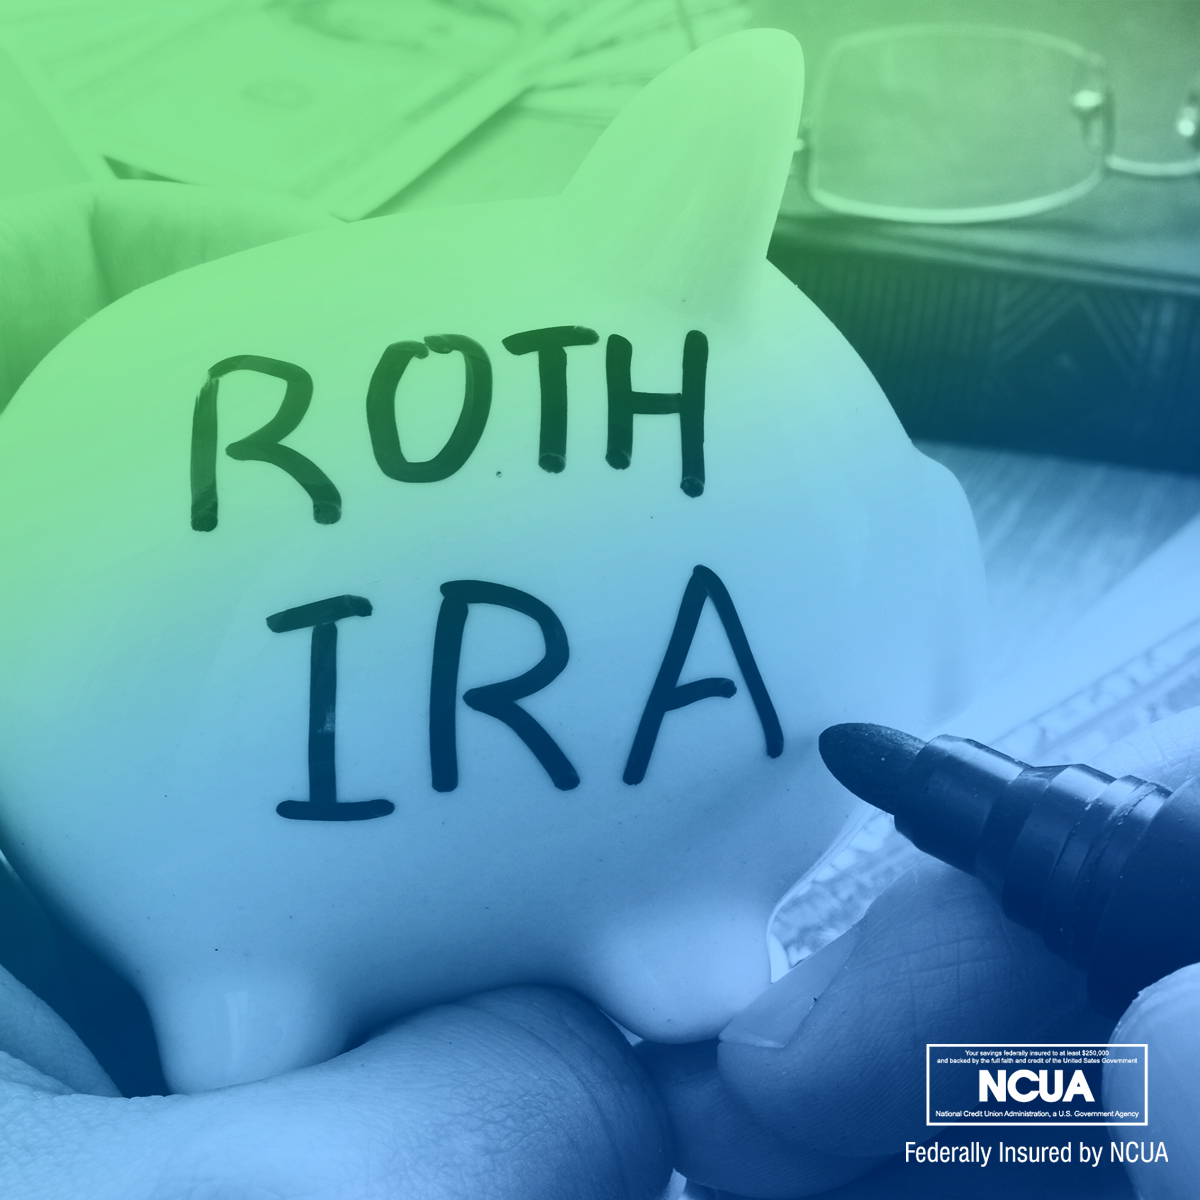 Moving into a Roth IRA may help maximize your IRA savings, but it depends on your retirement savings needs.